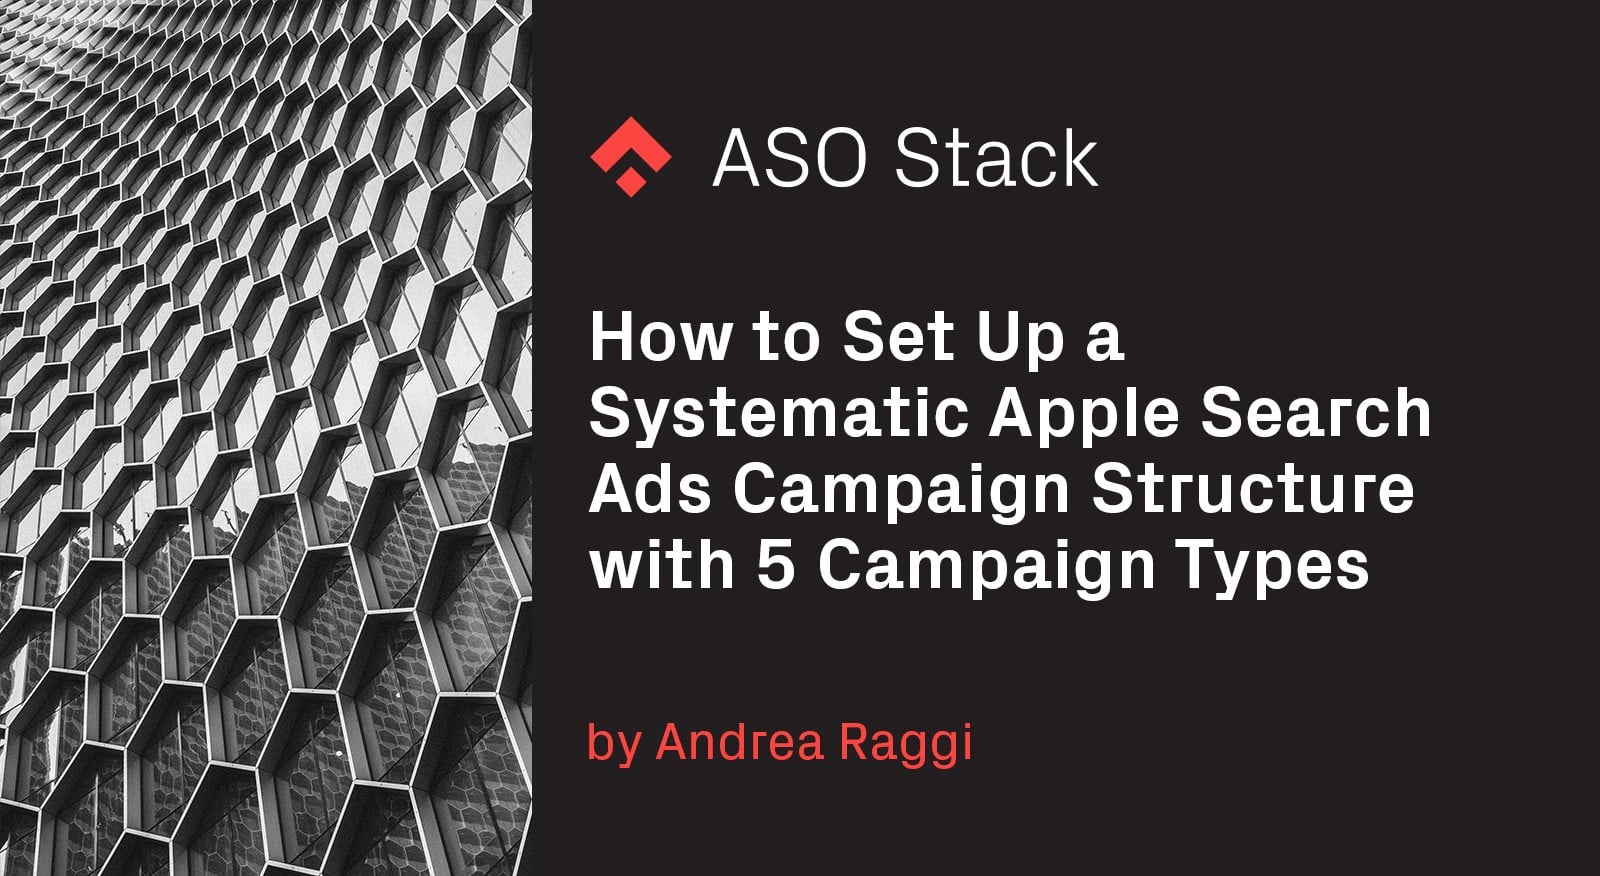 How to Set Up a Systematic Apple Search Ads Campaign Structure with 5 Campaign Types